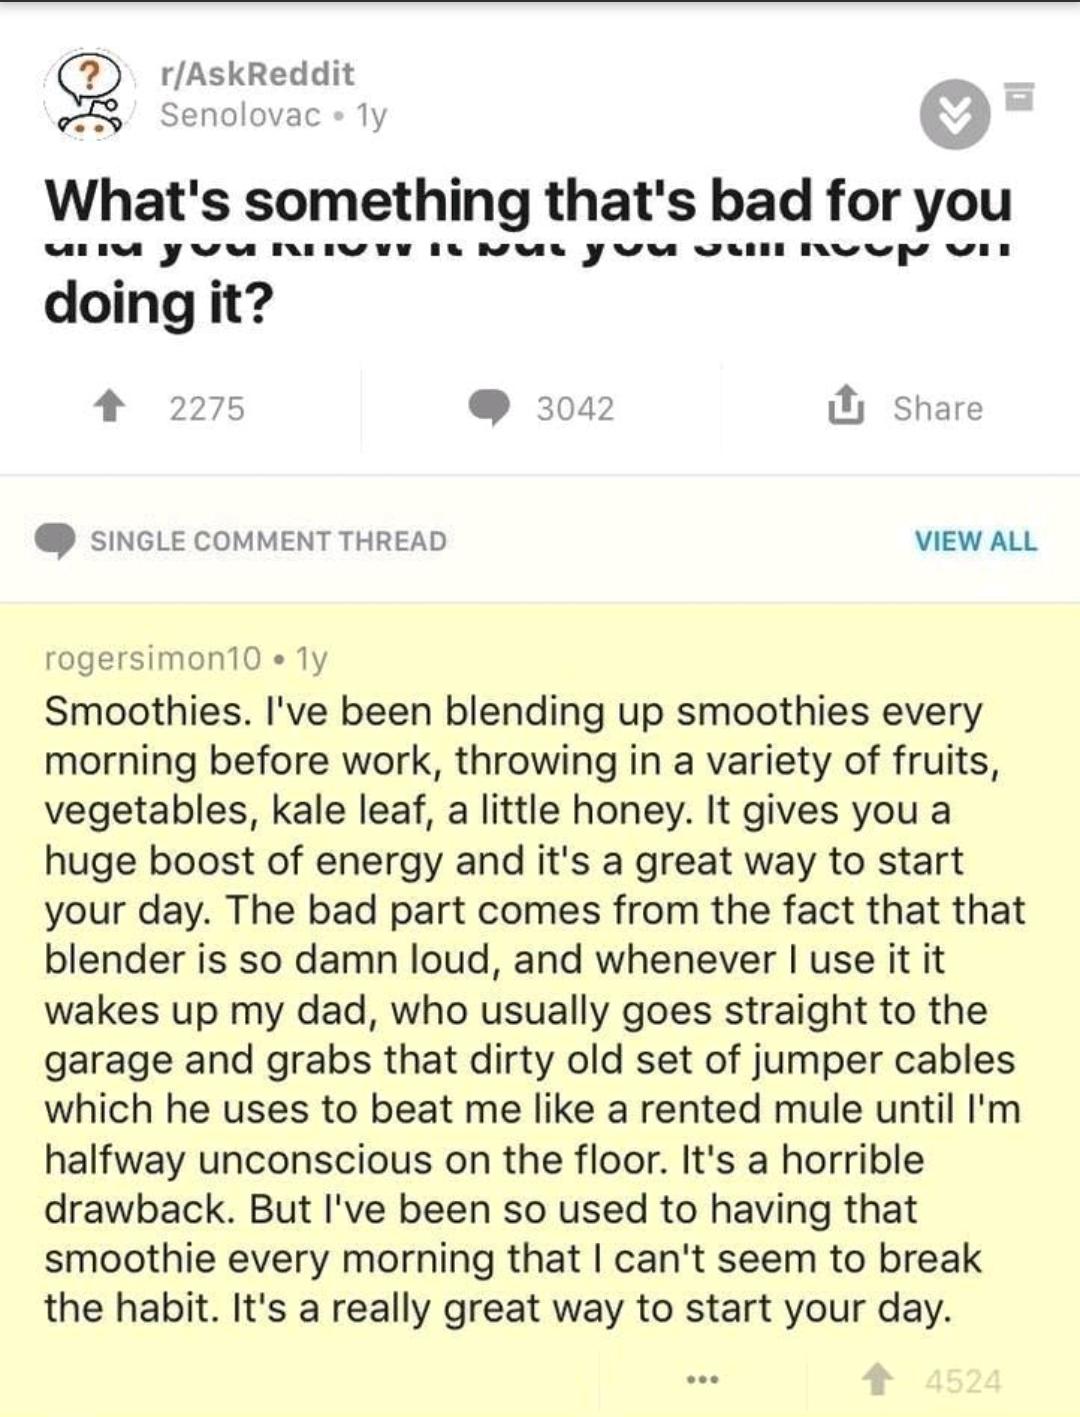 document - rAskReddit Senolovac ly What's something that's bad for you unu yuu Nuvy il nur yuu uul Nuu Uit doing it? 2275 3042 U Single Comment Thread View All rogersimon 10.1y Smoothies. I've been blending up smoothies every morning before work, throwing